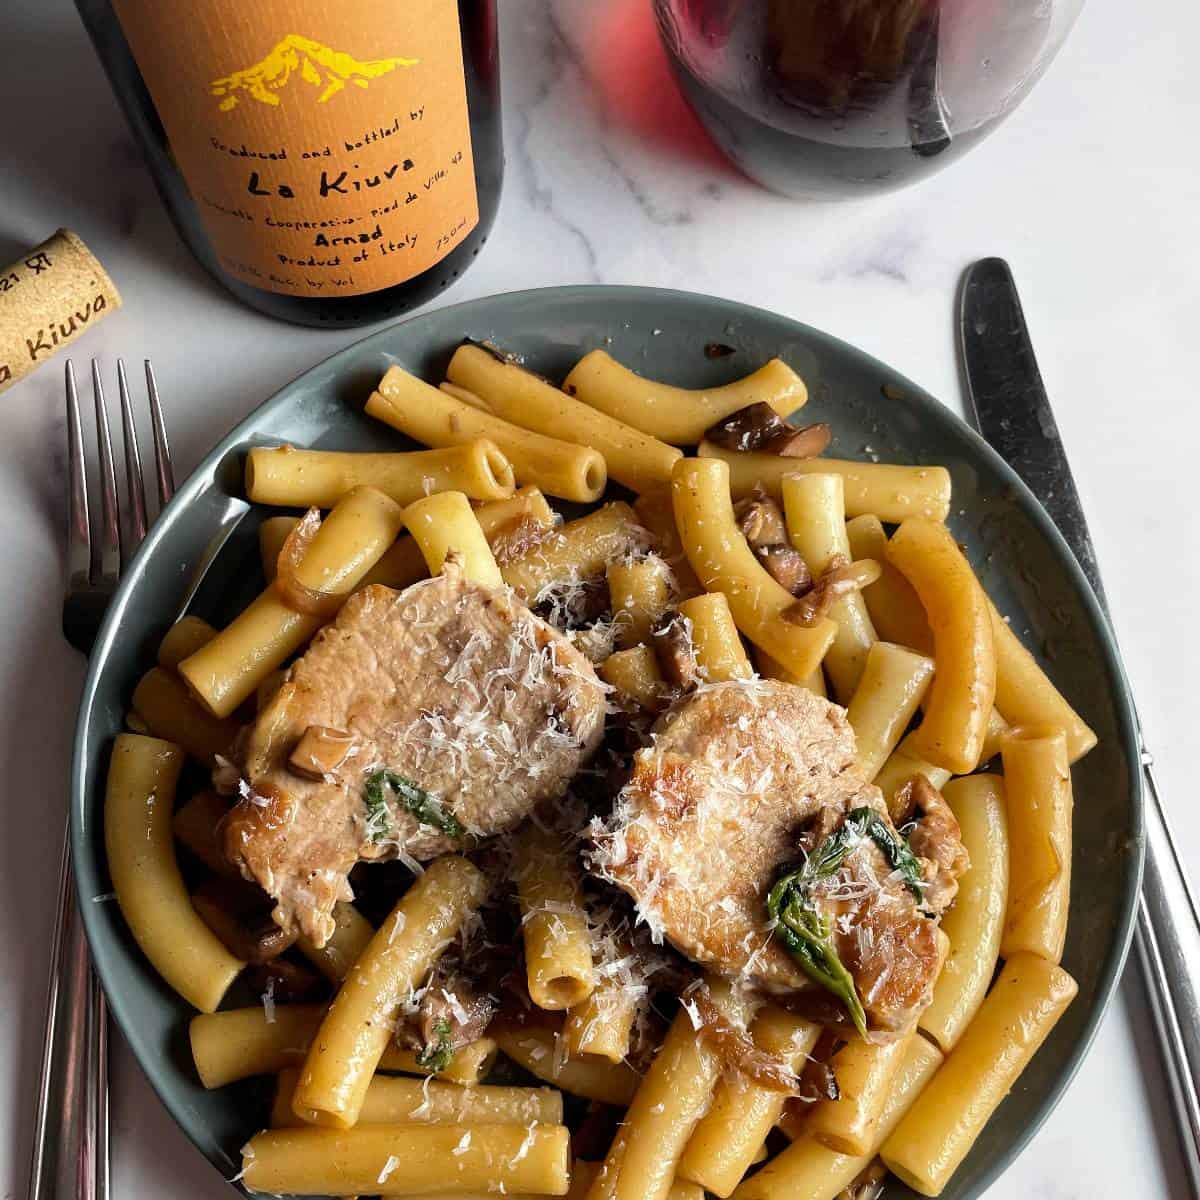 ziti pasta served with pork tenderloin, caramelized onions, basil and parmesan cheese. glass of red wine in the foreground.